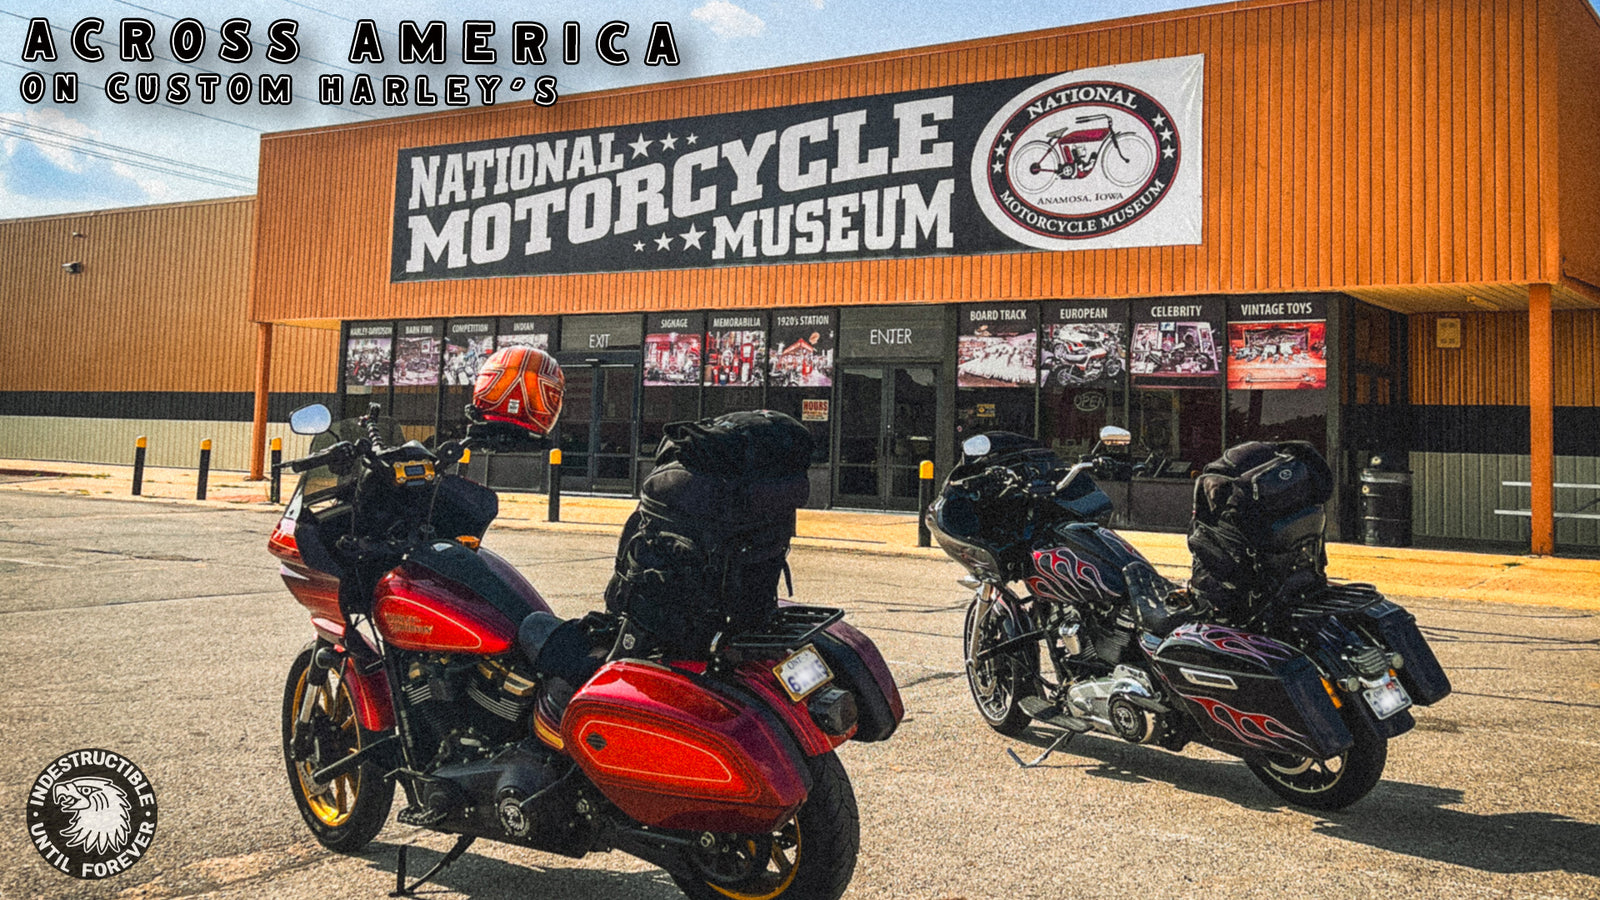 National Motorcycle Museum | On the way to Milwaukee!